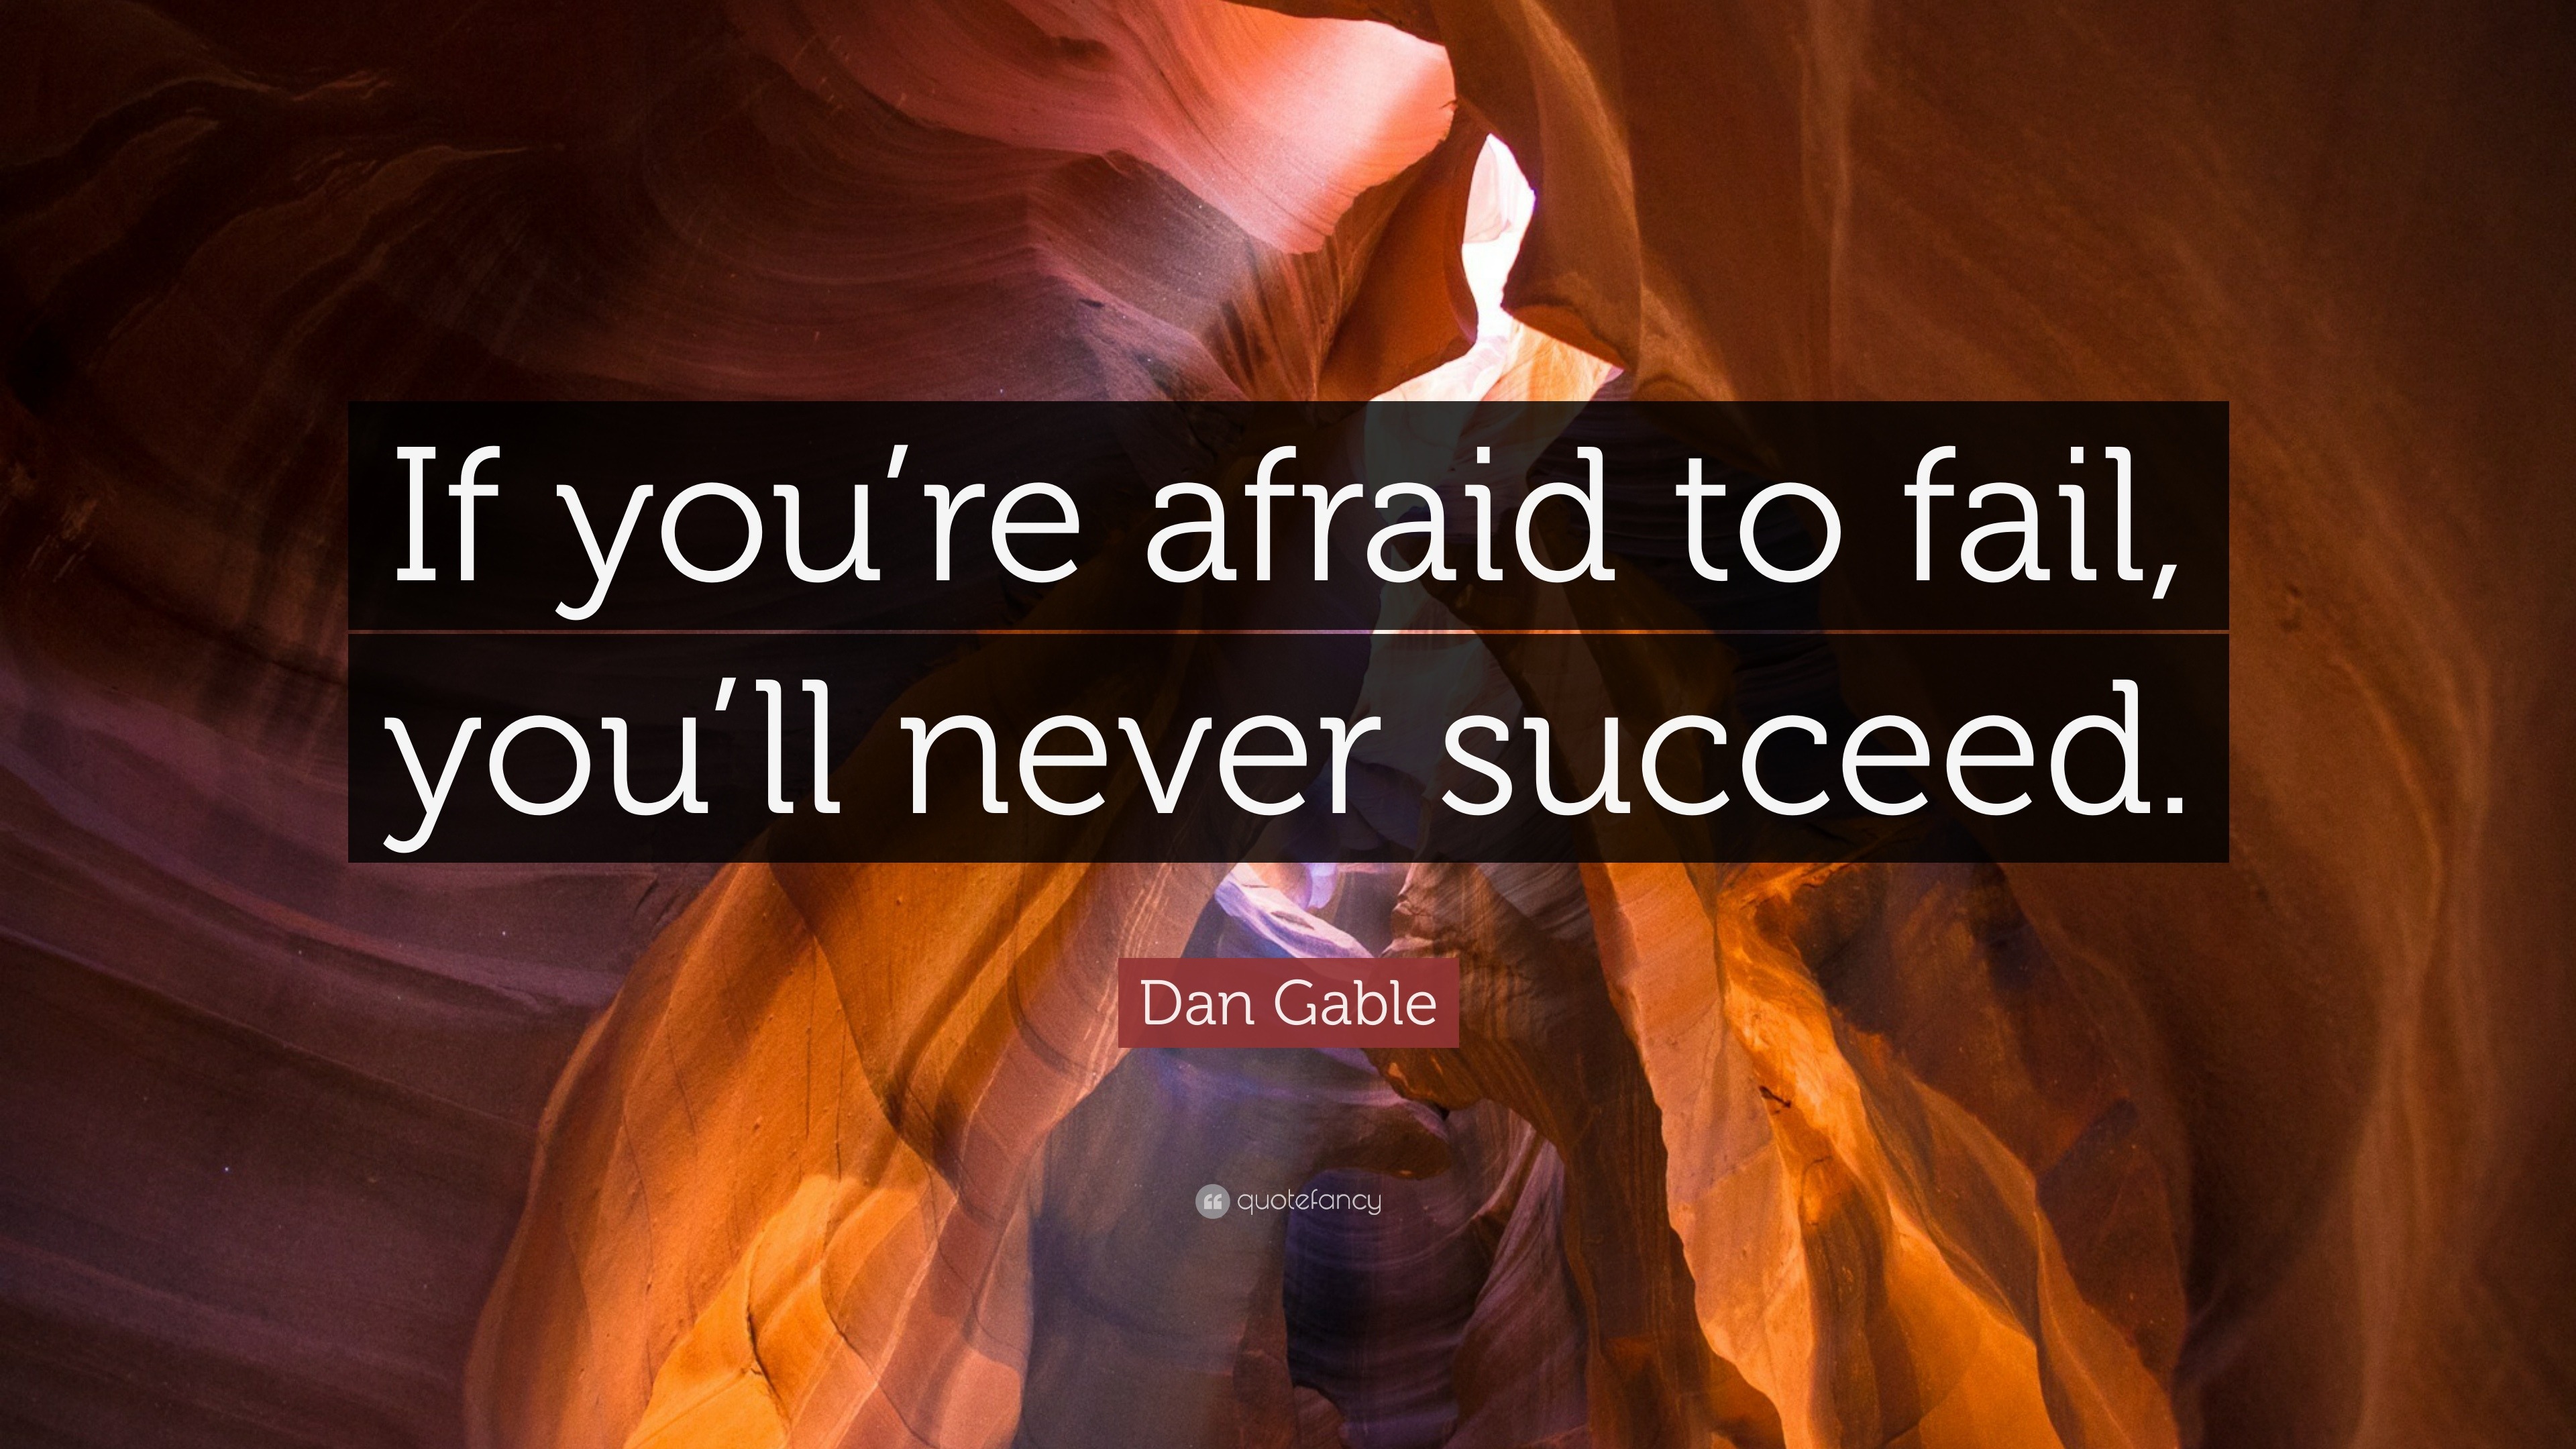 Dan Gable Quote: “If you’re afraid to fail, you’ll never succeed.”